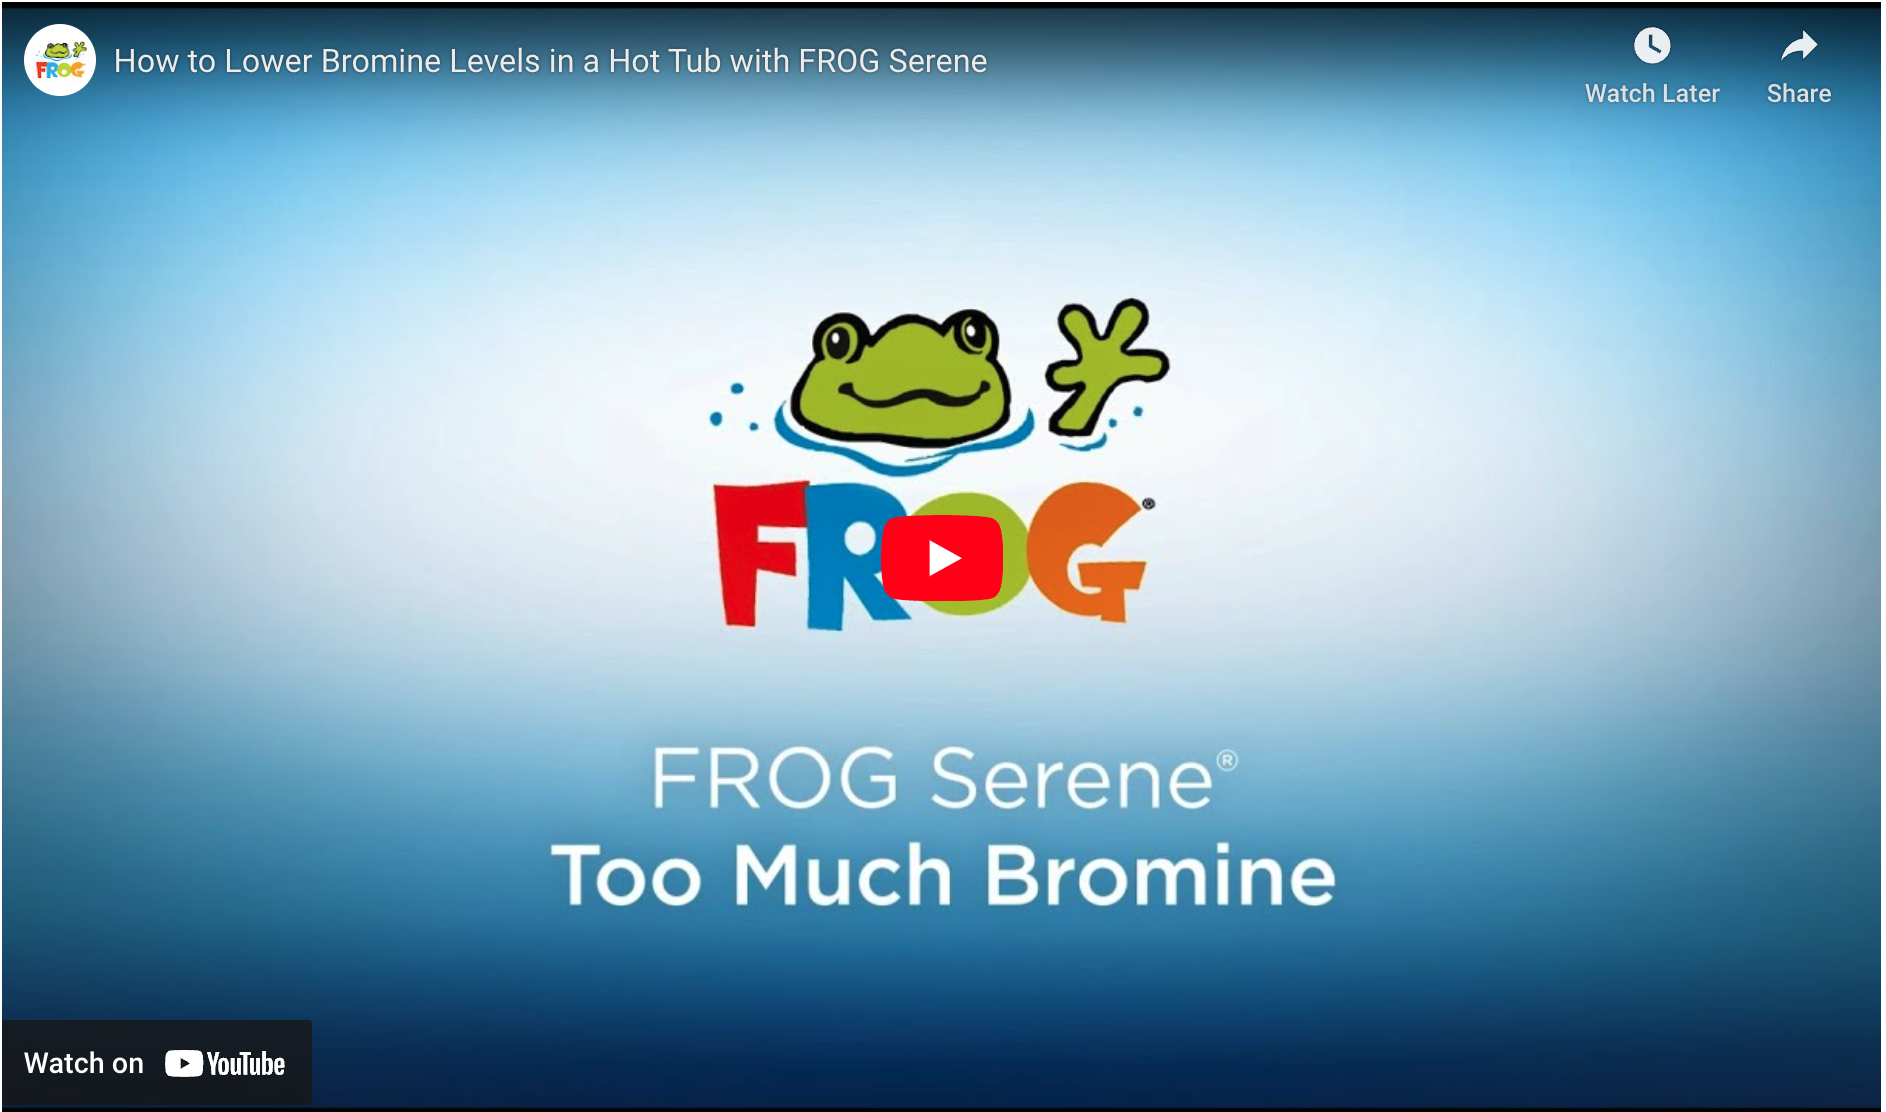 How to Lower Bromine Levels in a Hot Tub with FROG Serene